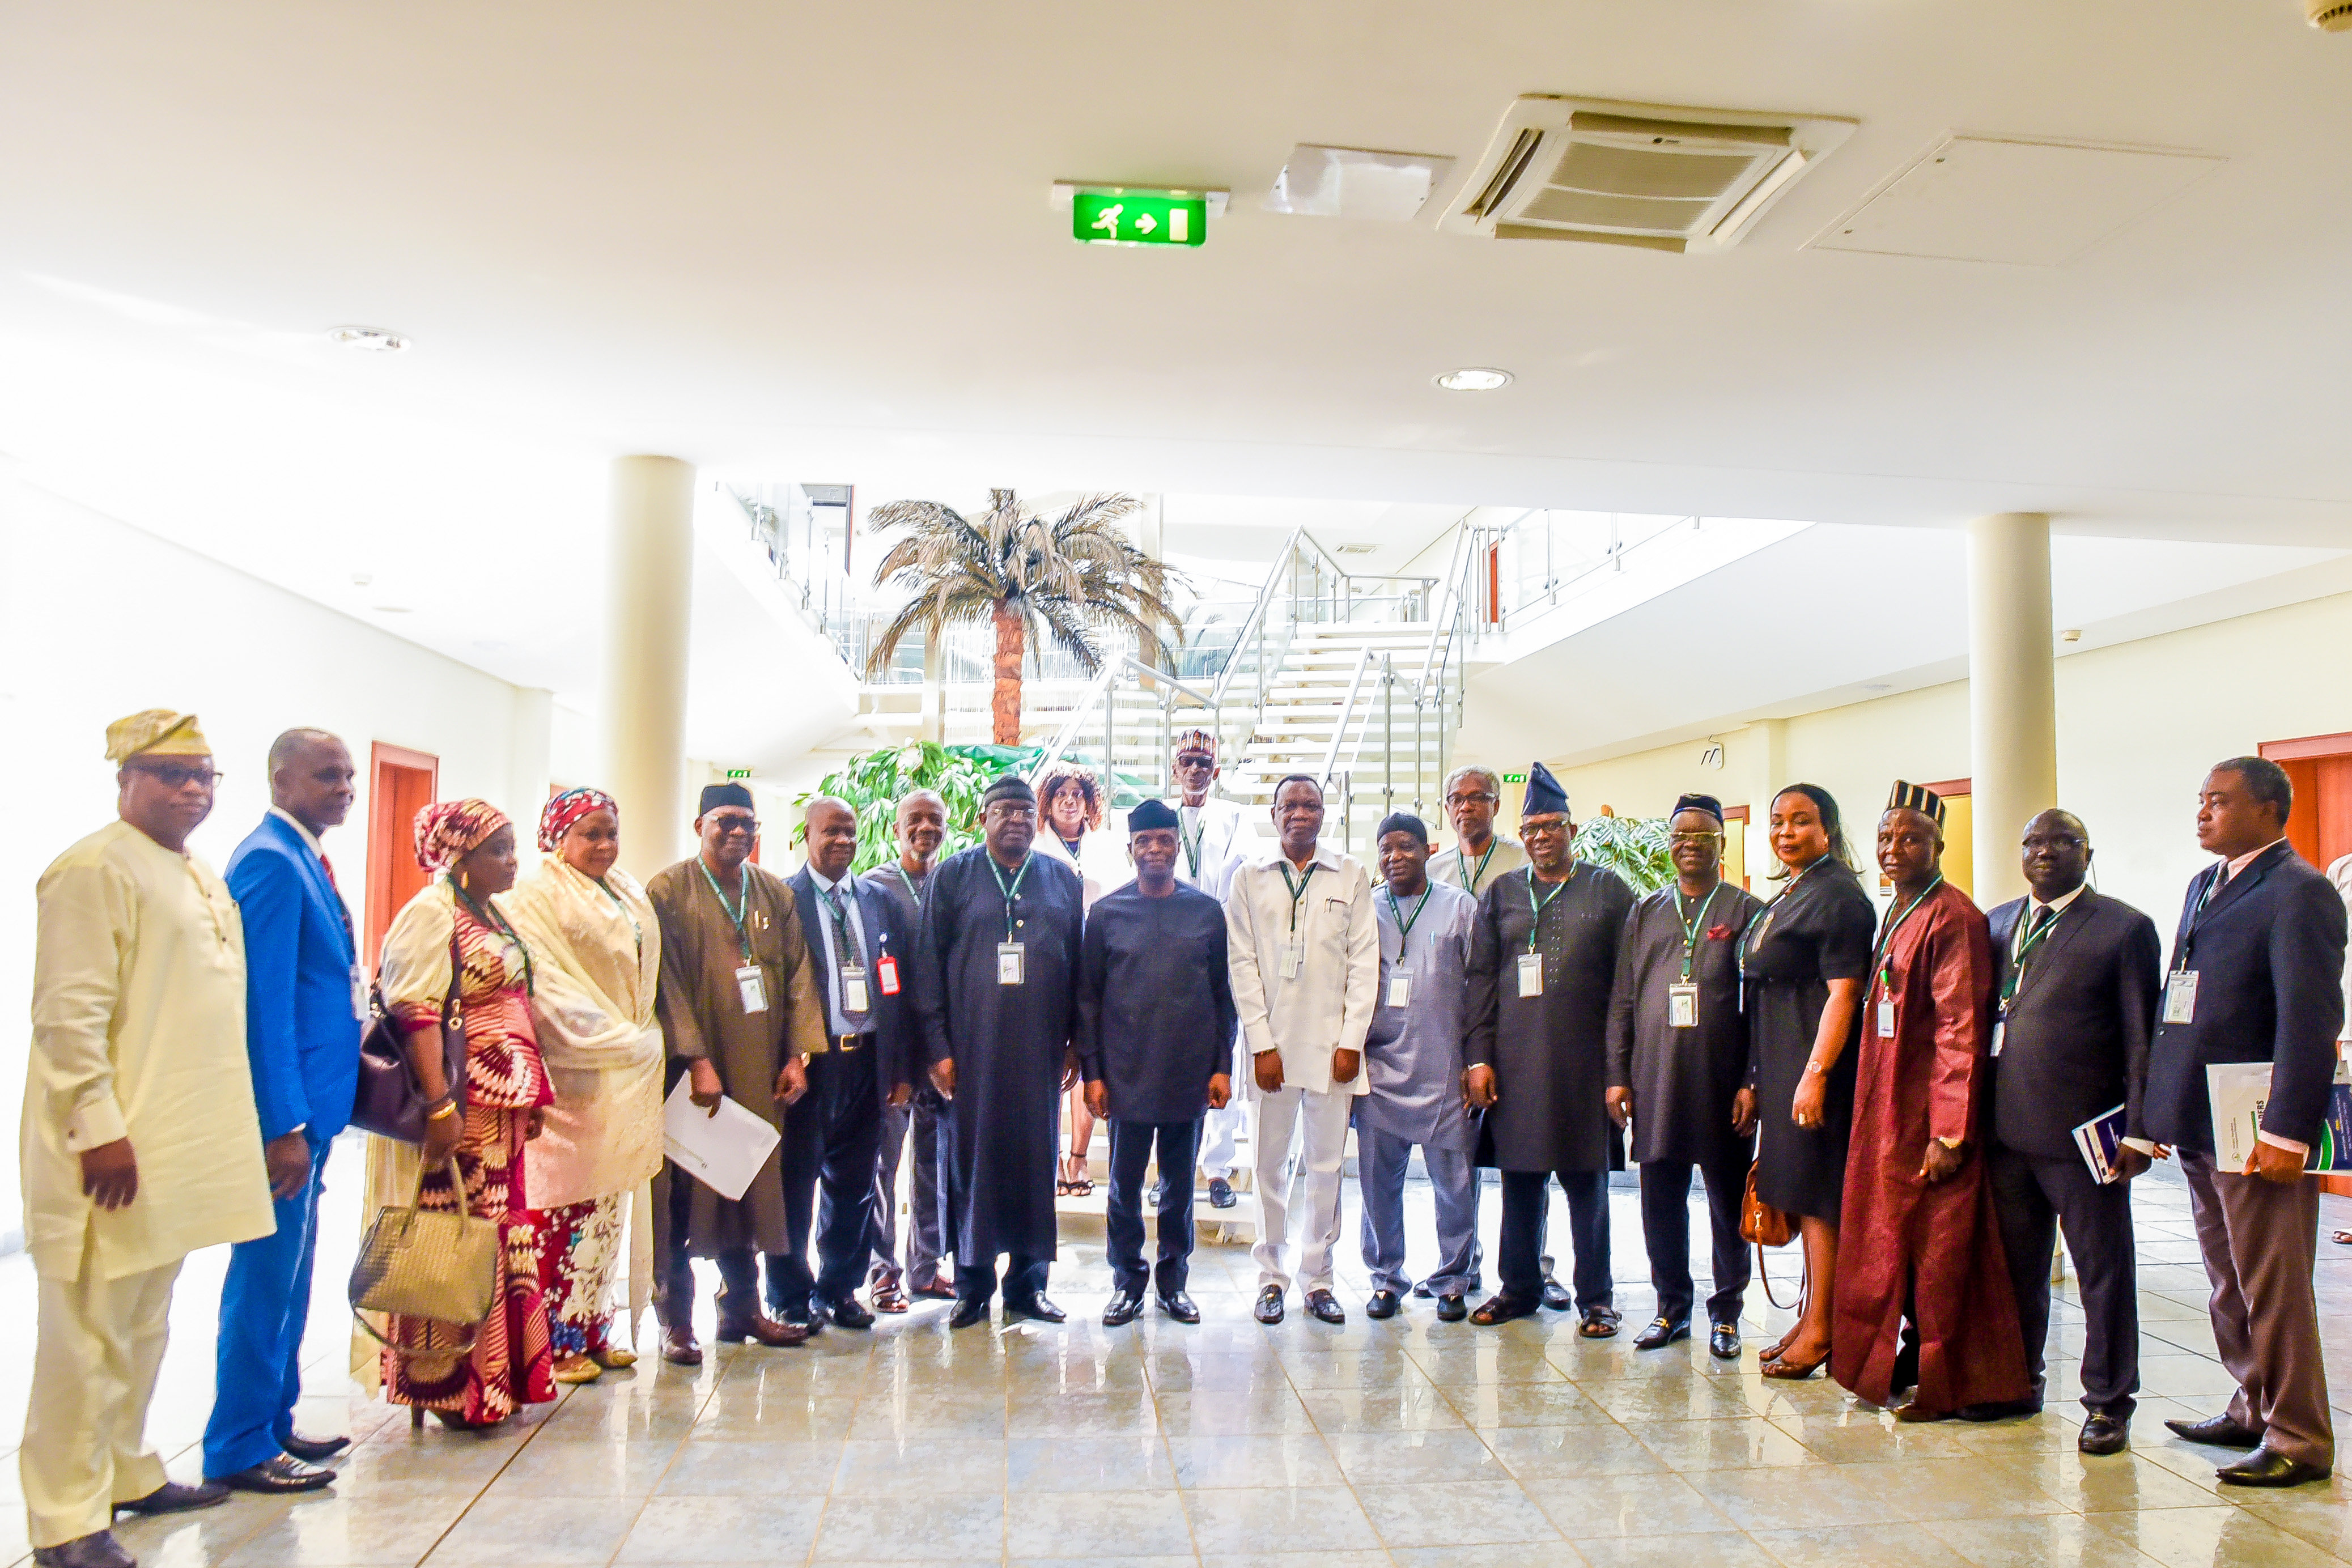 VP Osinbajo Receives Members Of The Public Complaints Commission On 24/09/2019